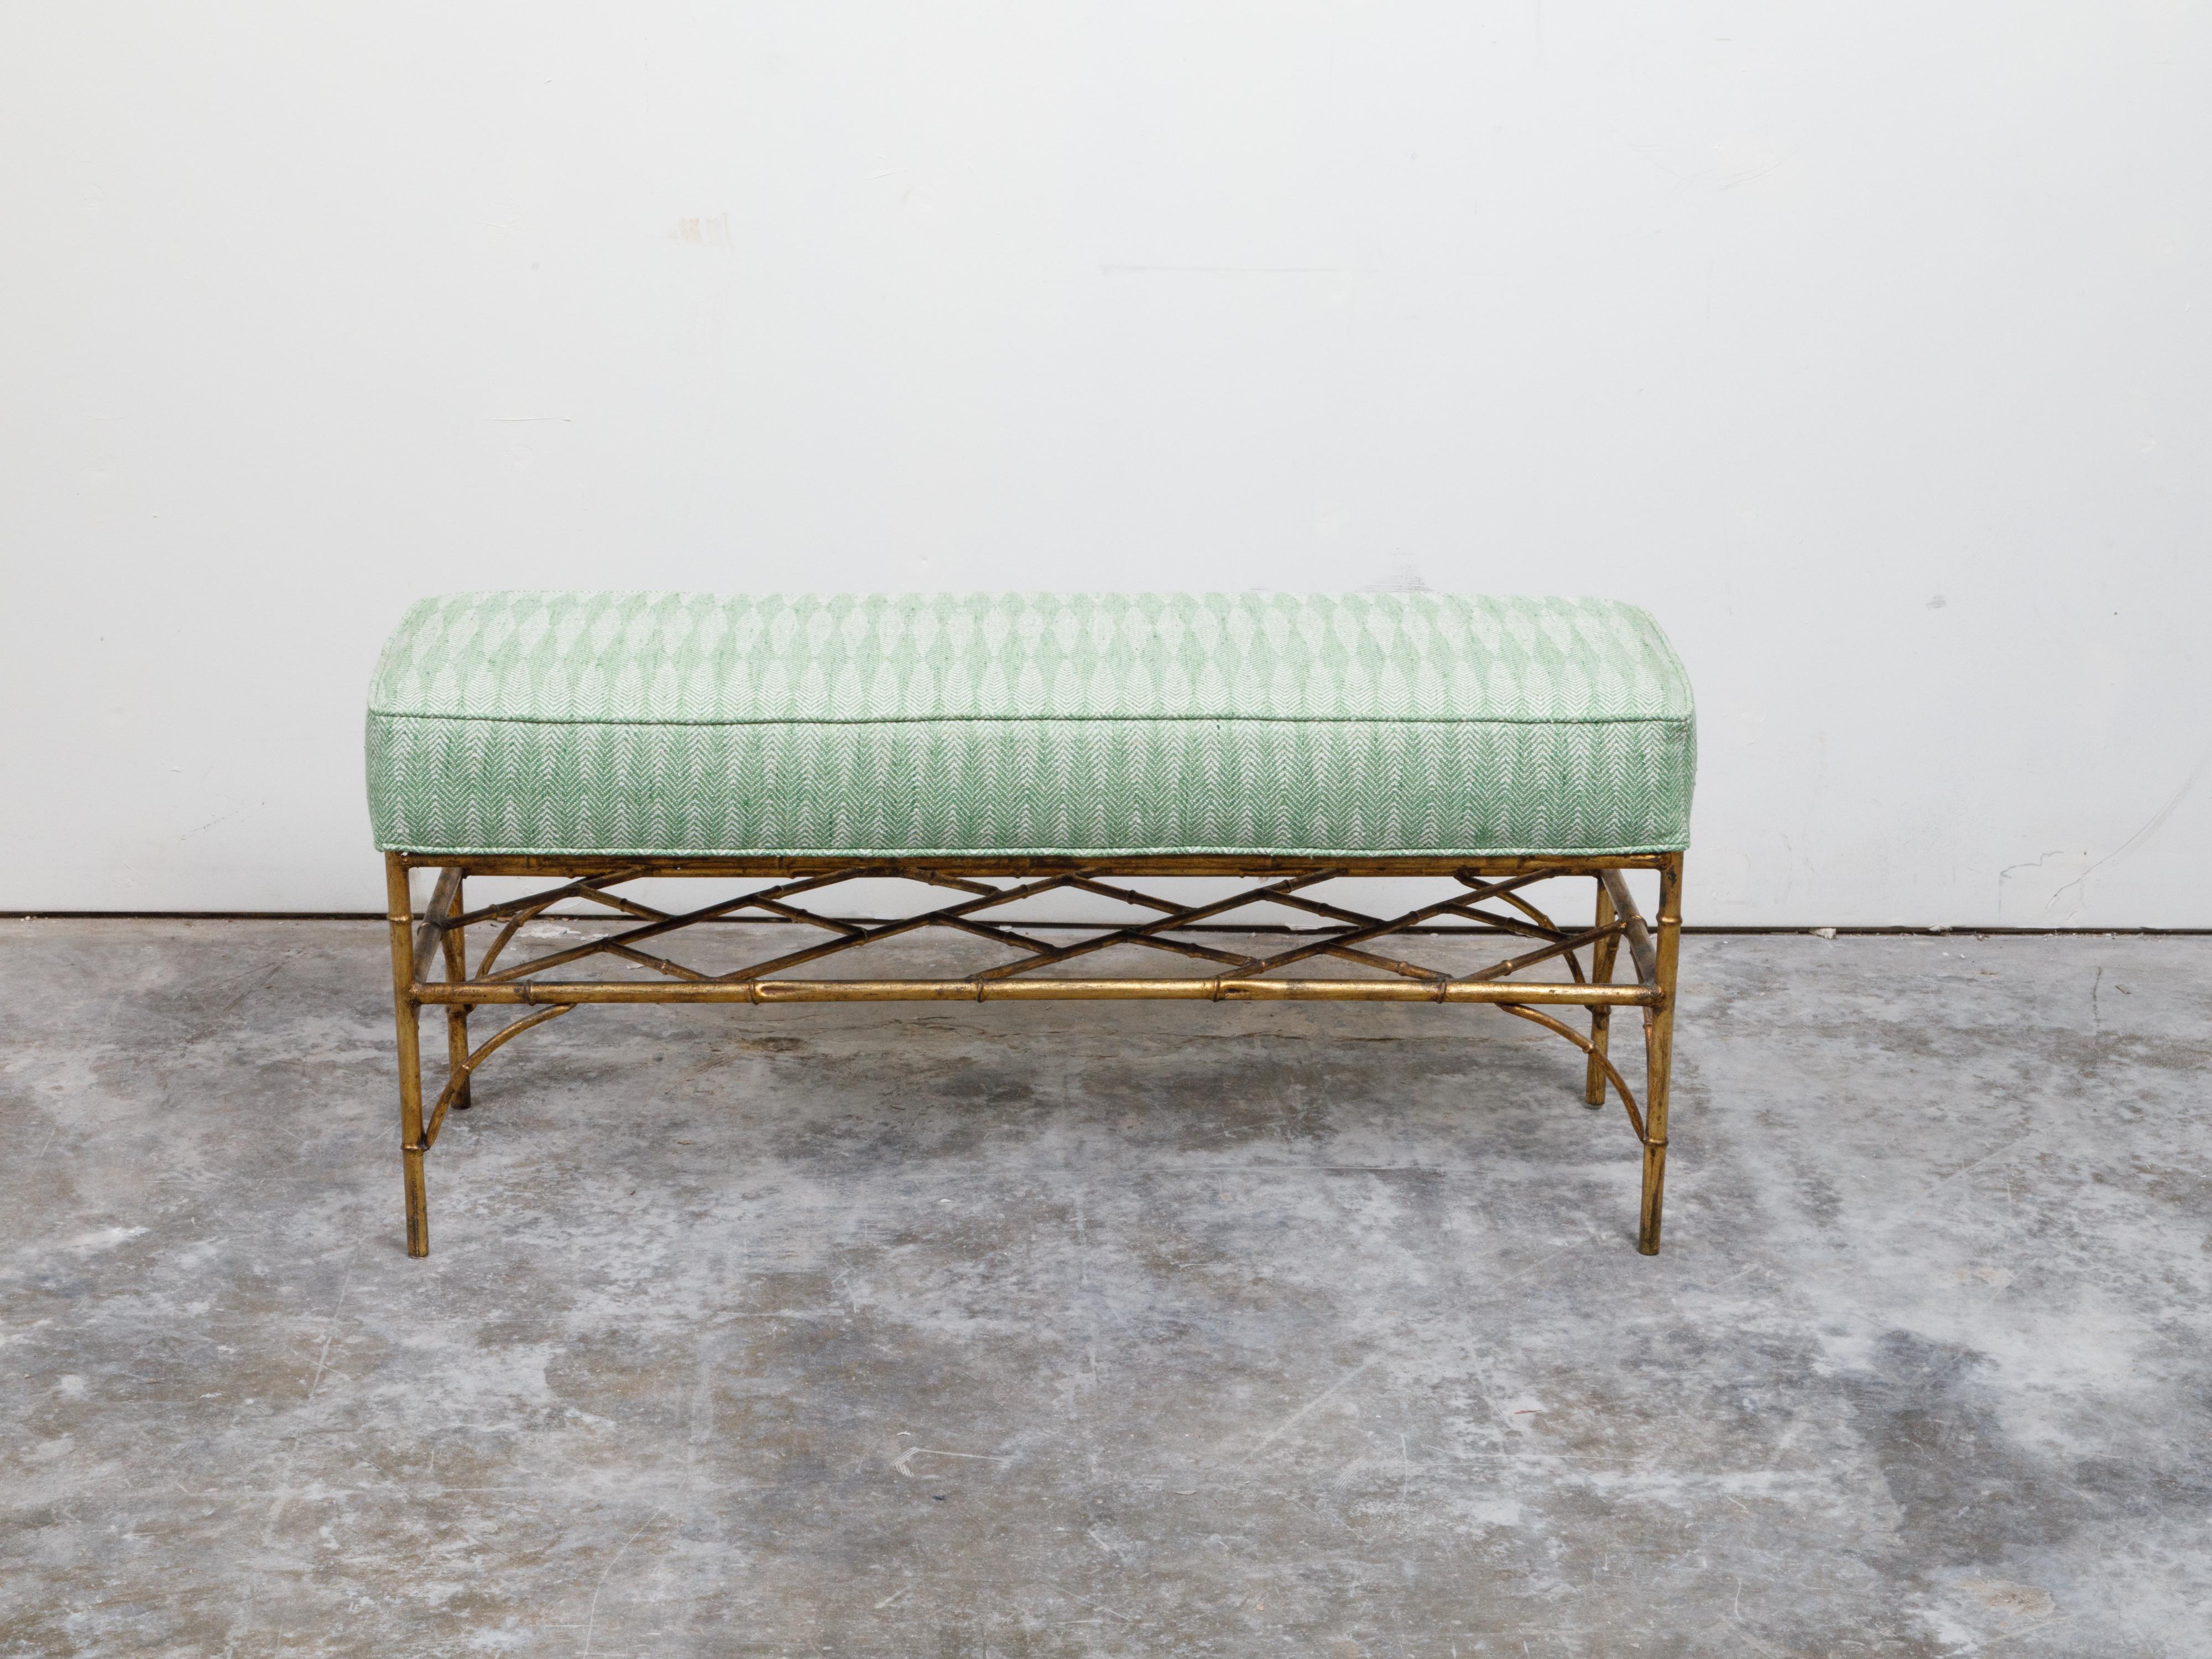 Italian Midcentury Gilt Metal Faux Bamboo Bench with Green Upholstered Seat For Sale 3